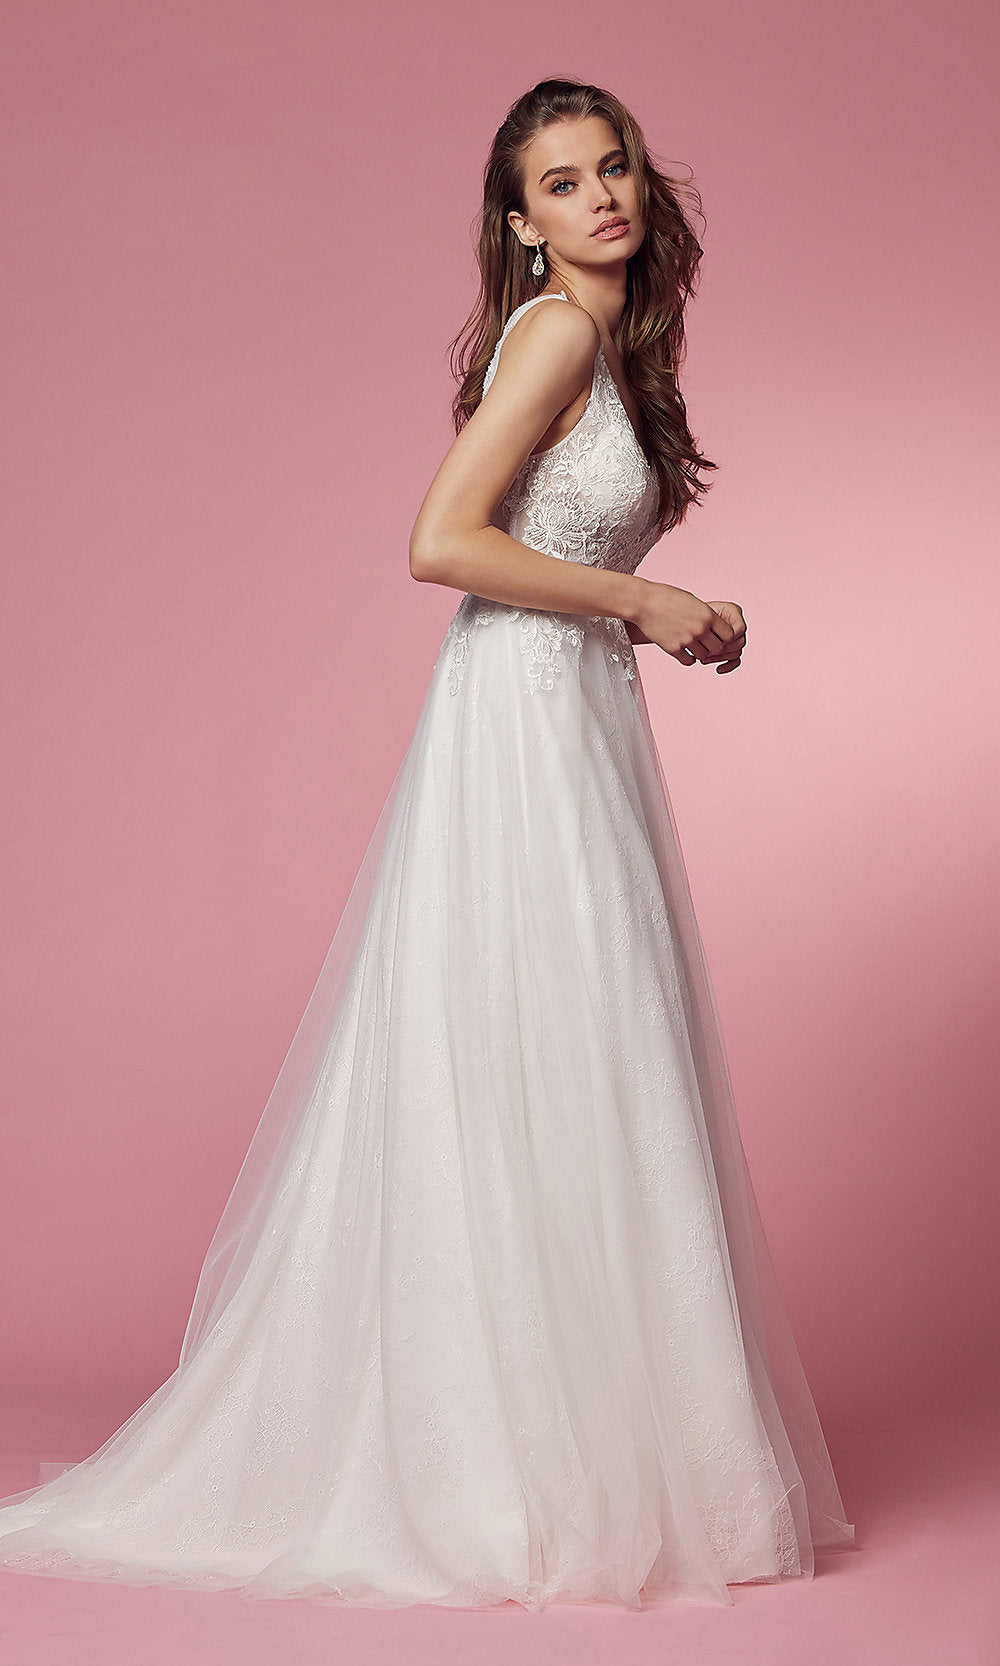 Narianna-White Lace-Embroidered Ball-Gown Wedding Dress